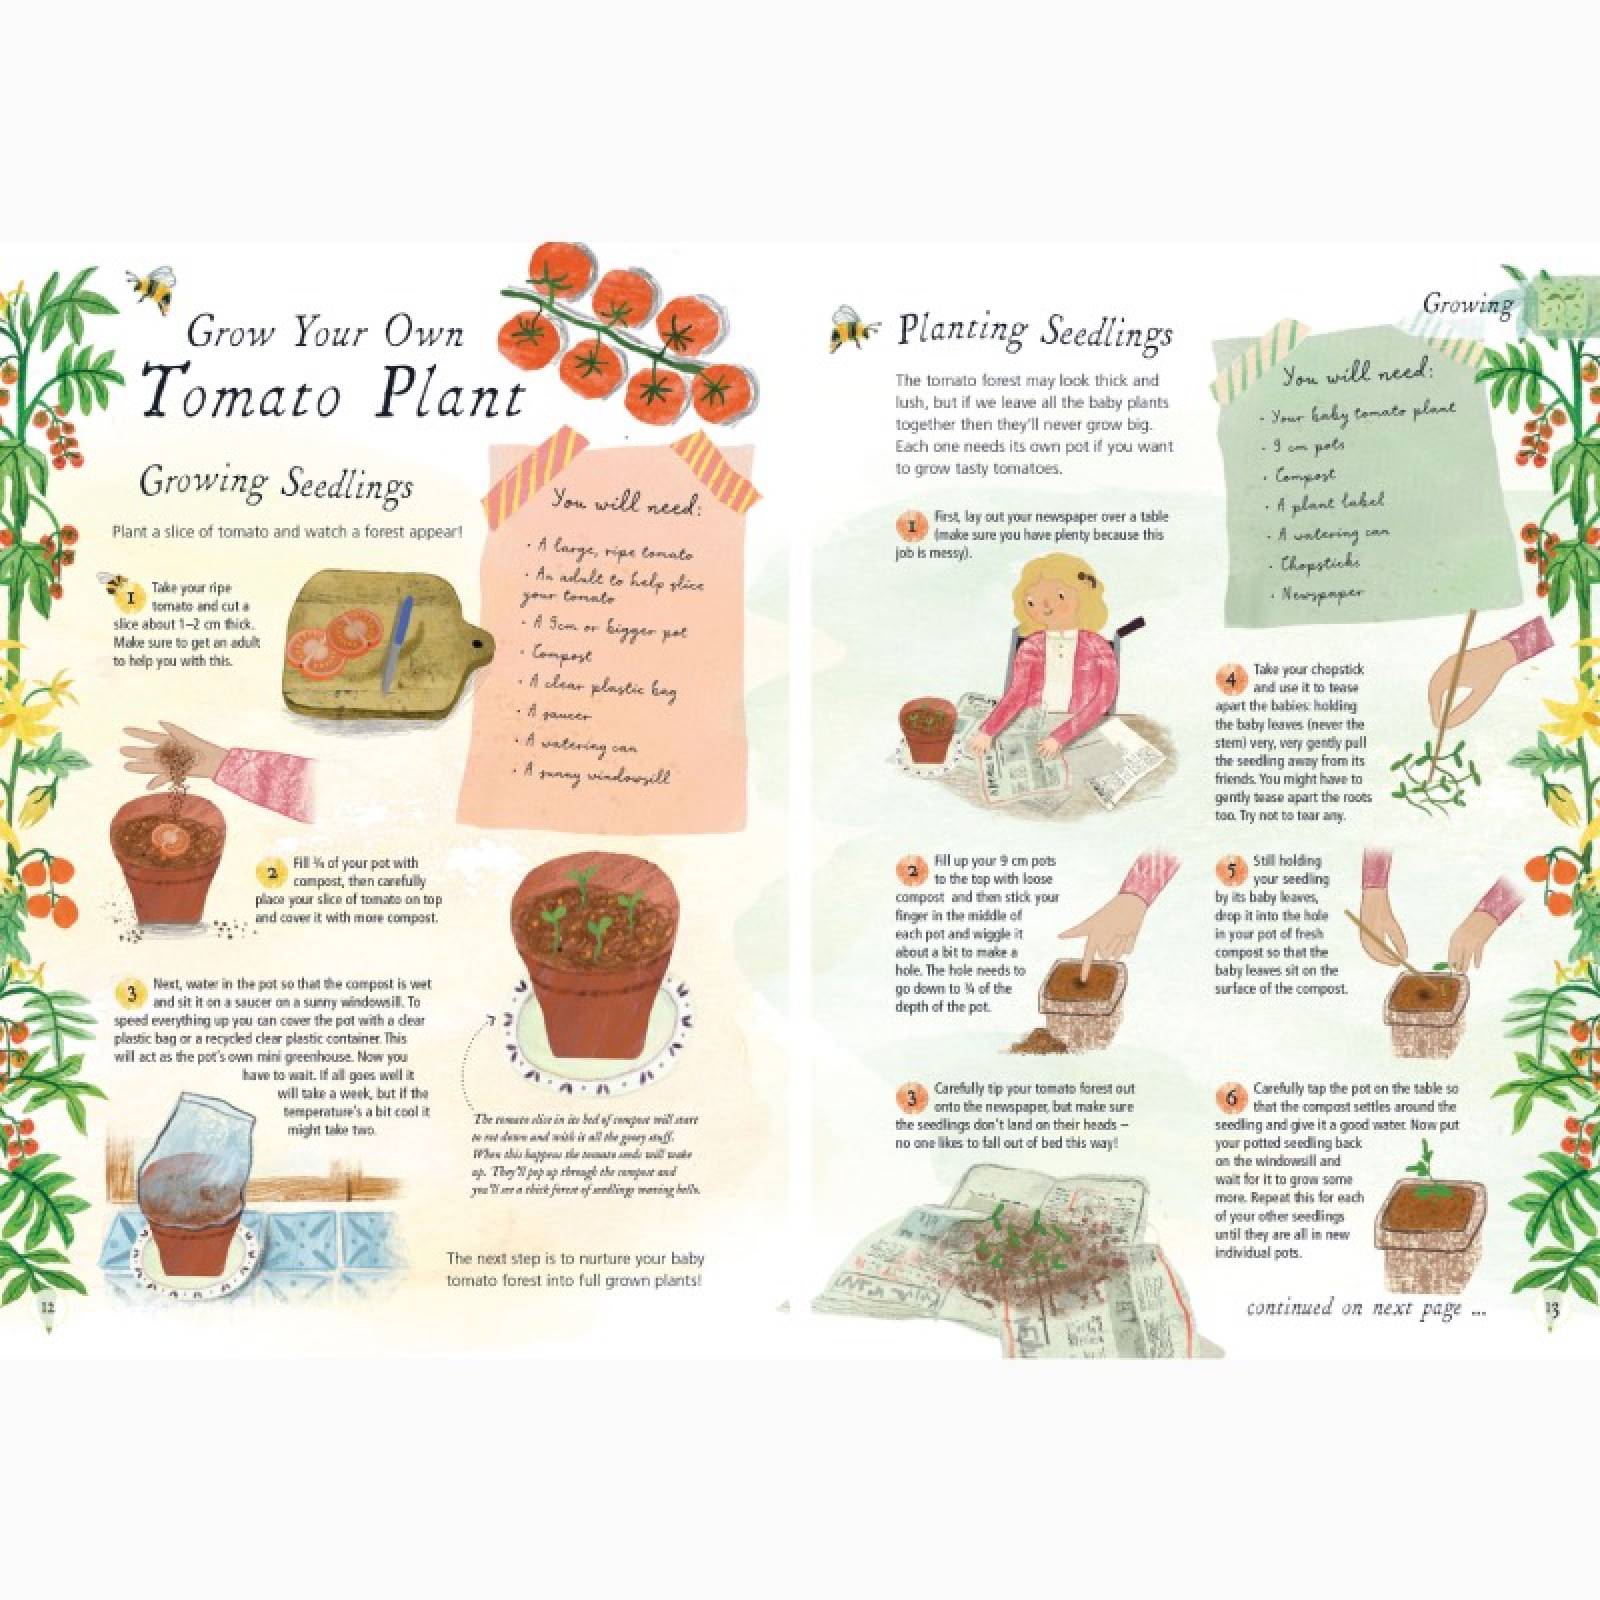 Grow, Forage & Make By Alys Fowler - Paperback Book thumbnails